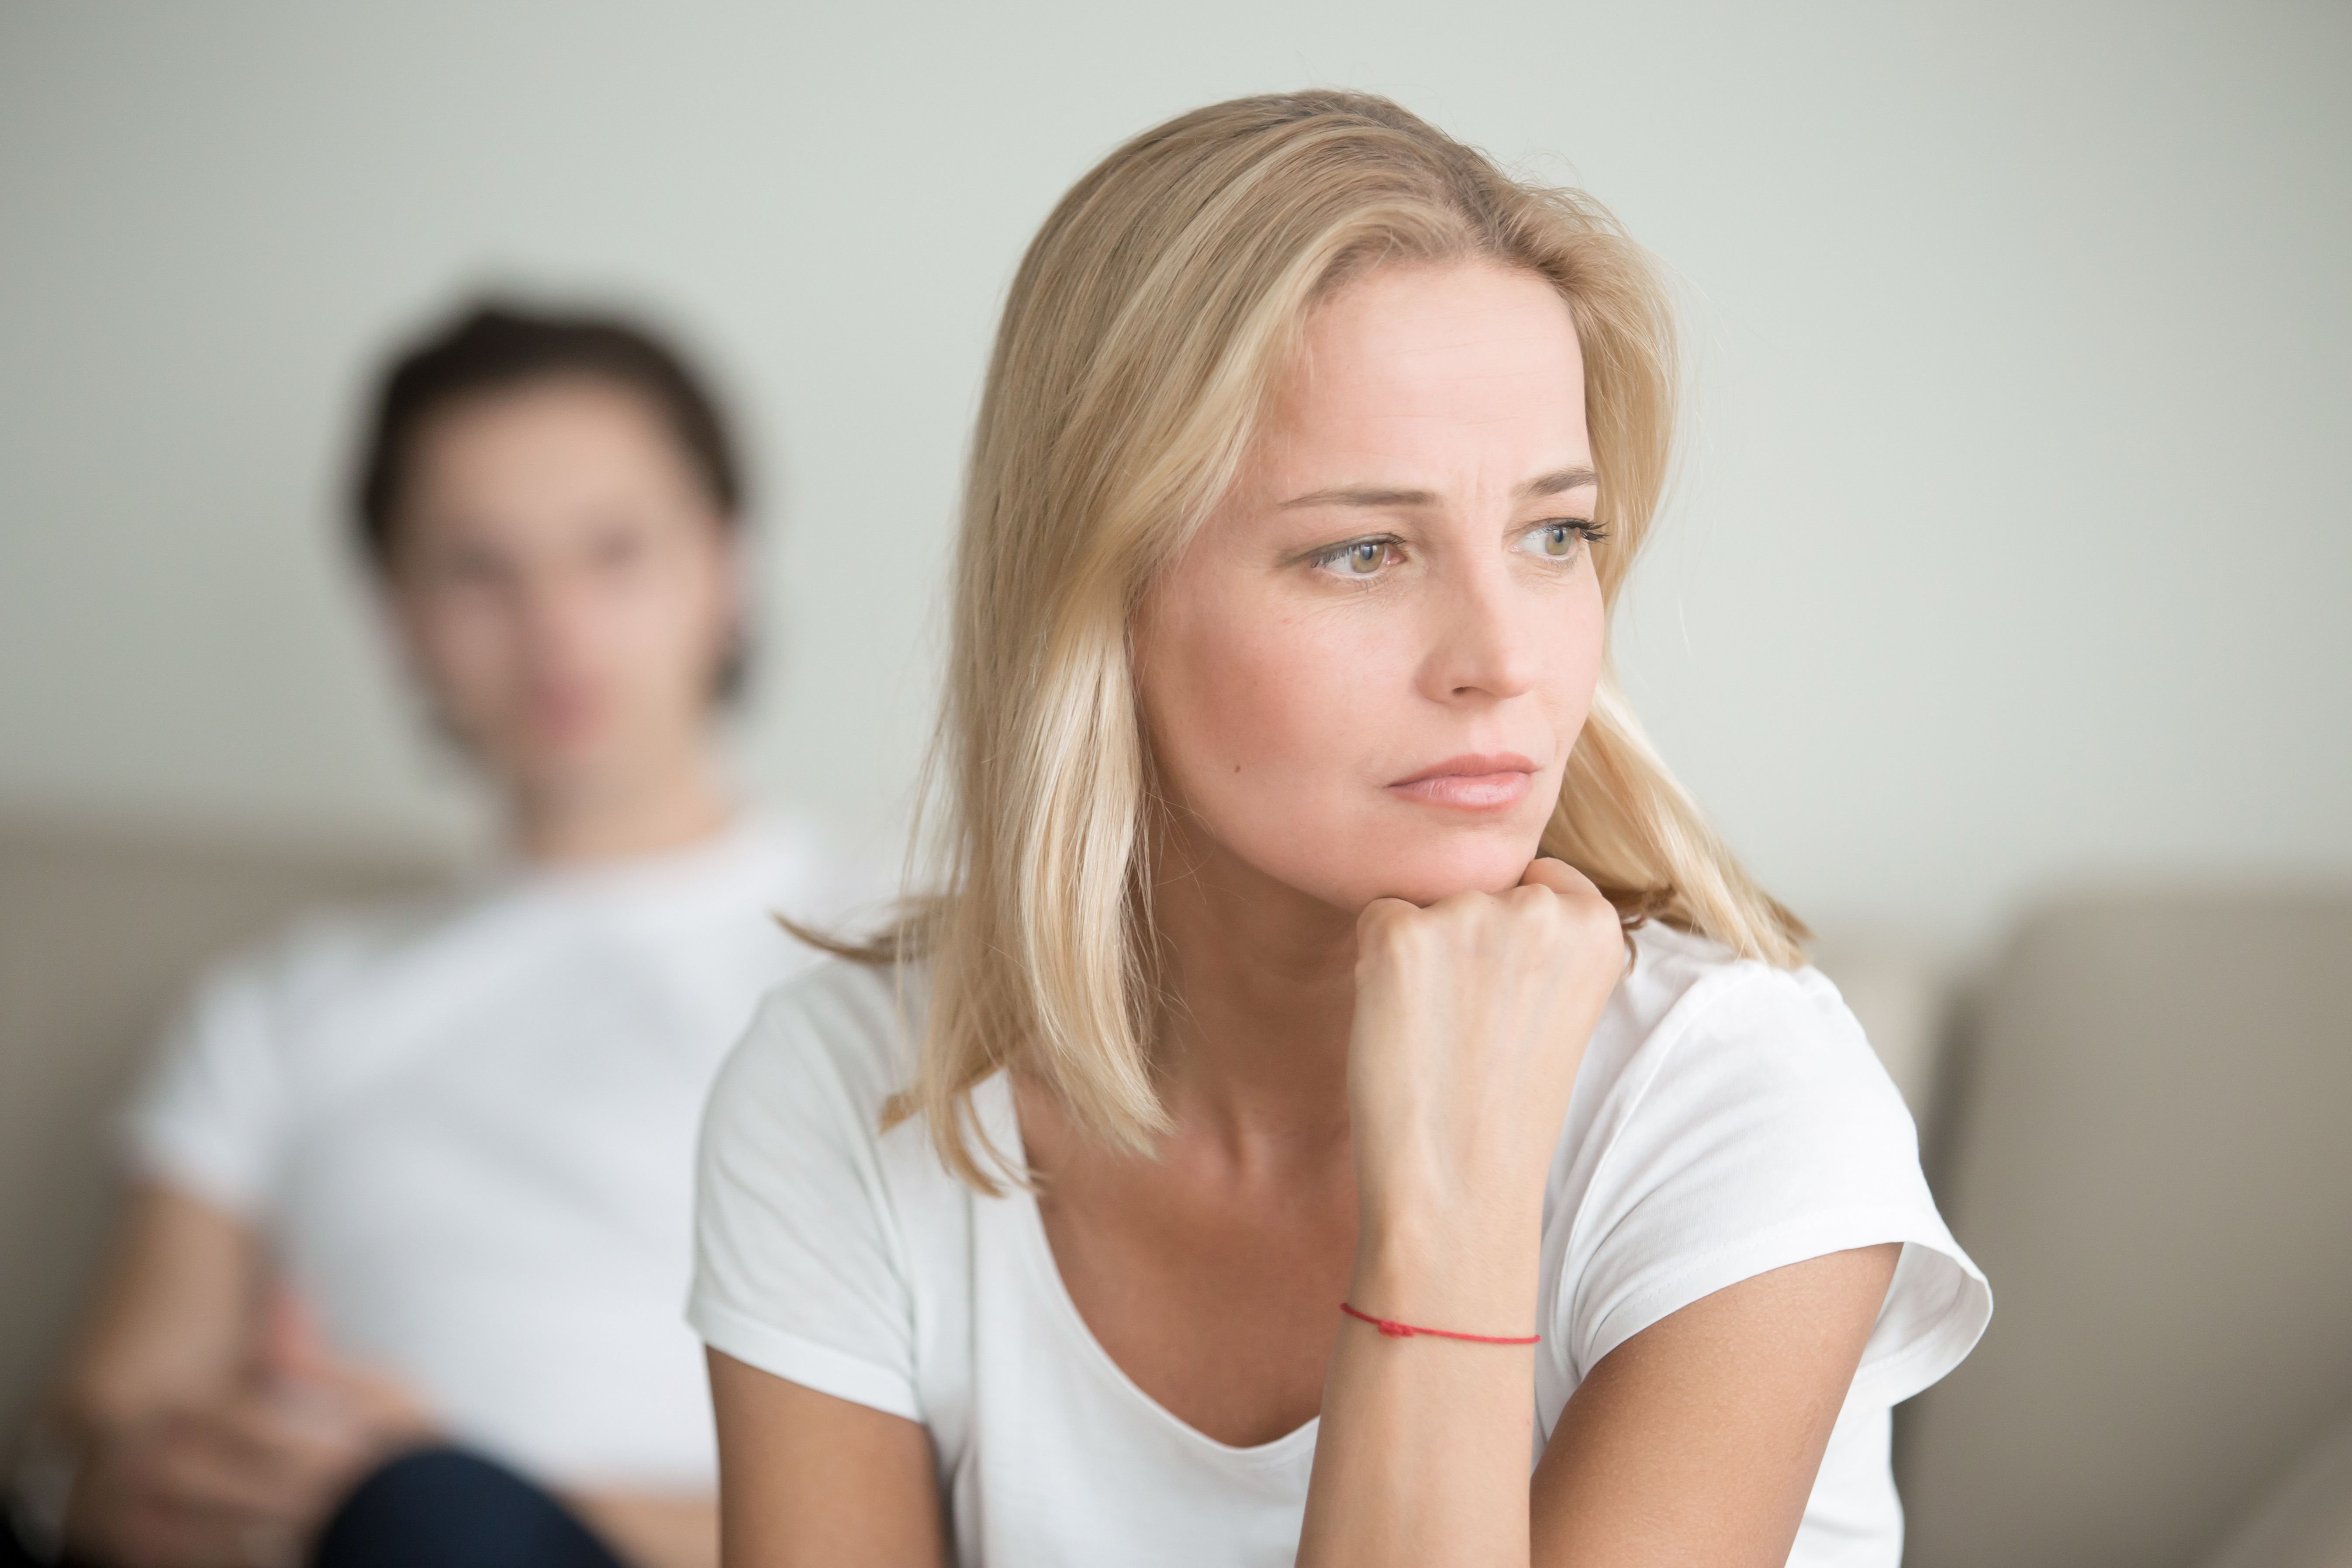 A woman looks upset while a man is behind her. | Source: Shutterstock